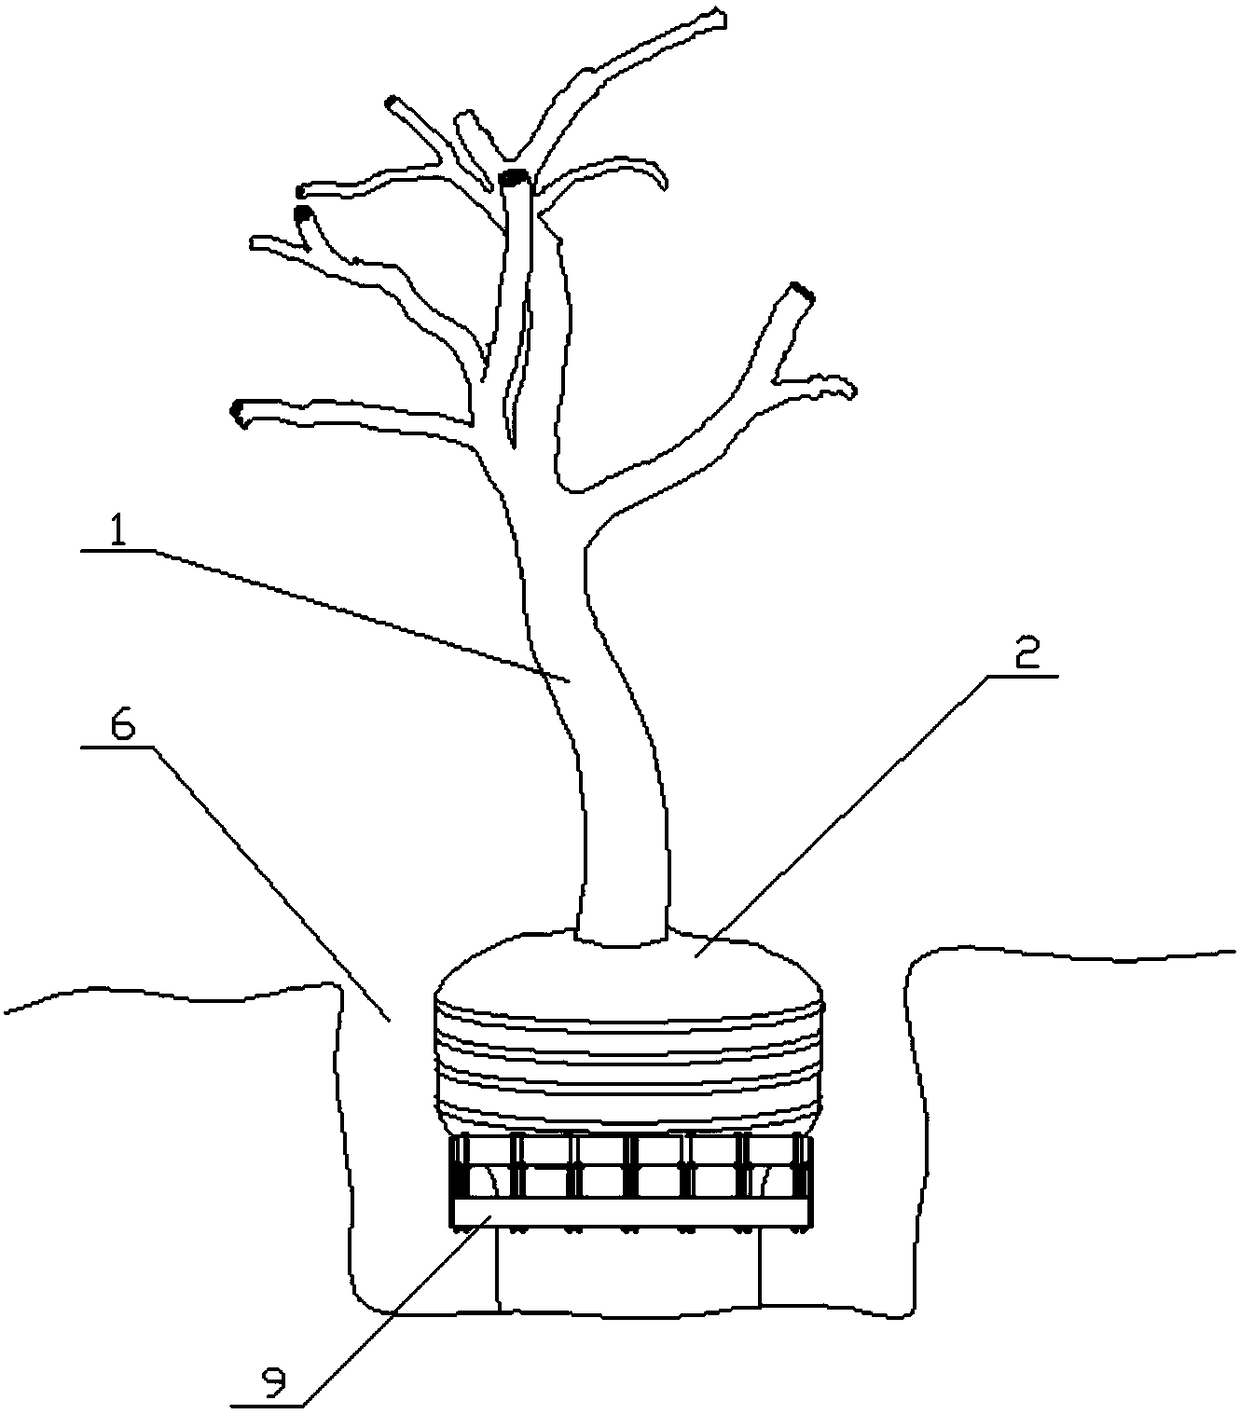 Method for movement and rejuvenation of old trees